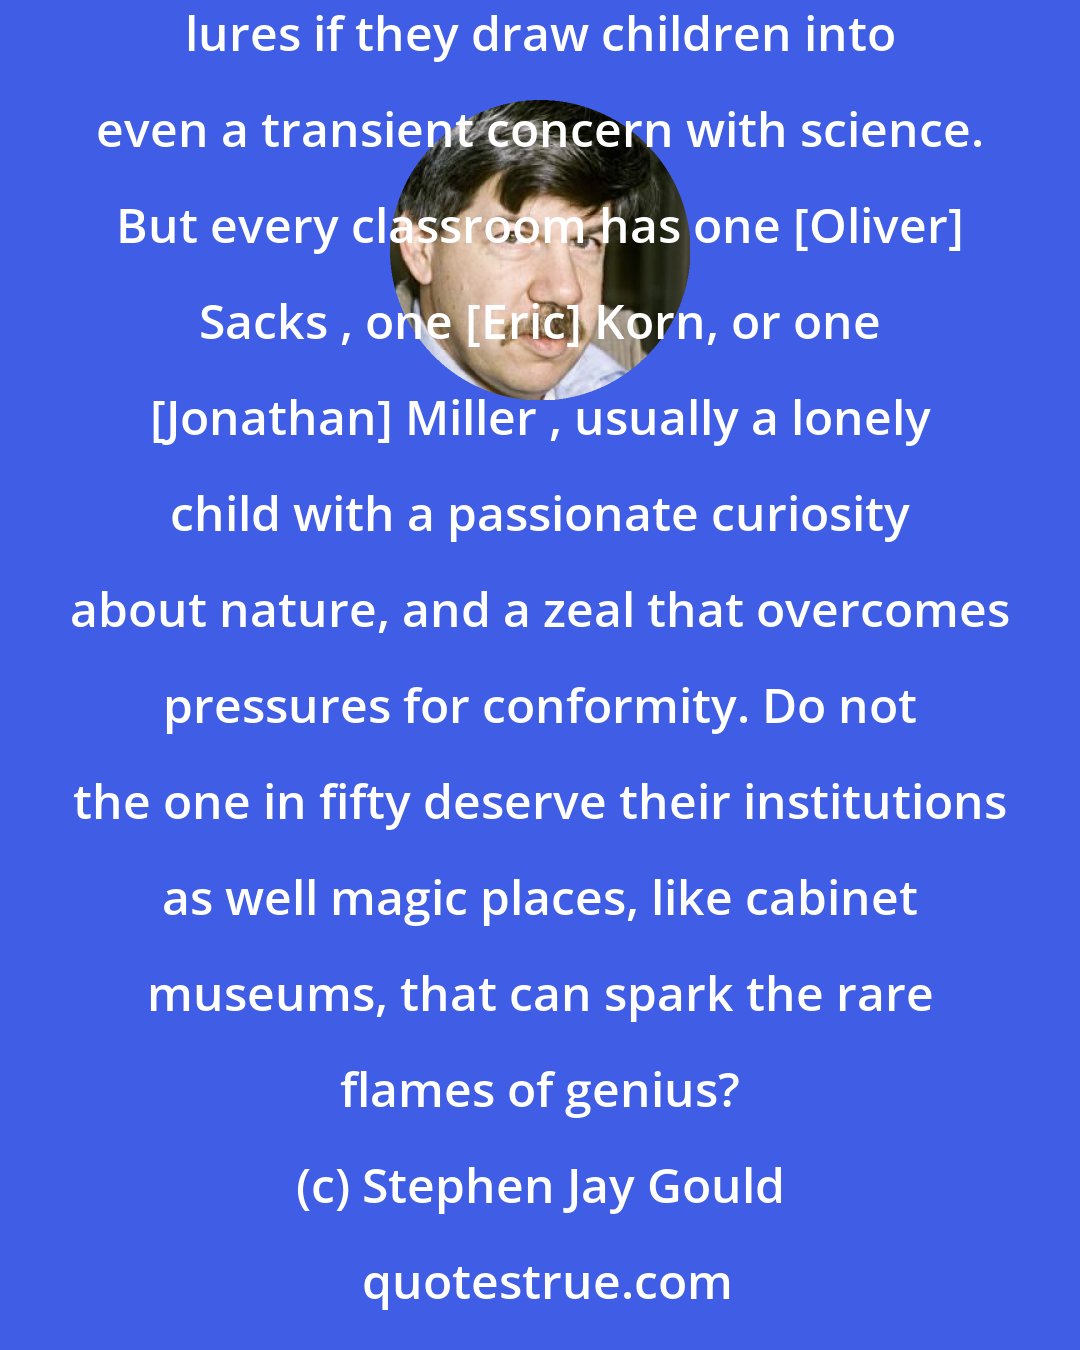 Stephen Jay Gould: True majorities, in a TV-dominated and anti-intellectual age, may need sound bites and flashing lights and I am not against supplying such lures if they draw children into even a transient concern with science. But every classroom has one [Oliver] Sacks , one [Eric] Korn, or one [Jonathan] Miller , usually a lonely child with a passionate curiosity about nature, and a zeal that overcomes pressures for conformity. Do not the one in fifty deserve their institutions as well magic places, like cabinet museums, that can spark the rare flames of genius?